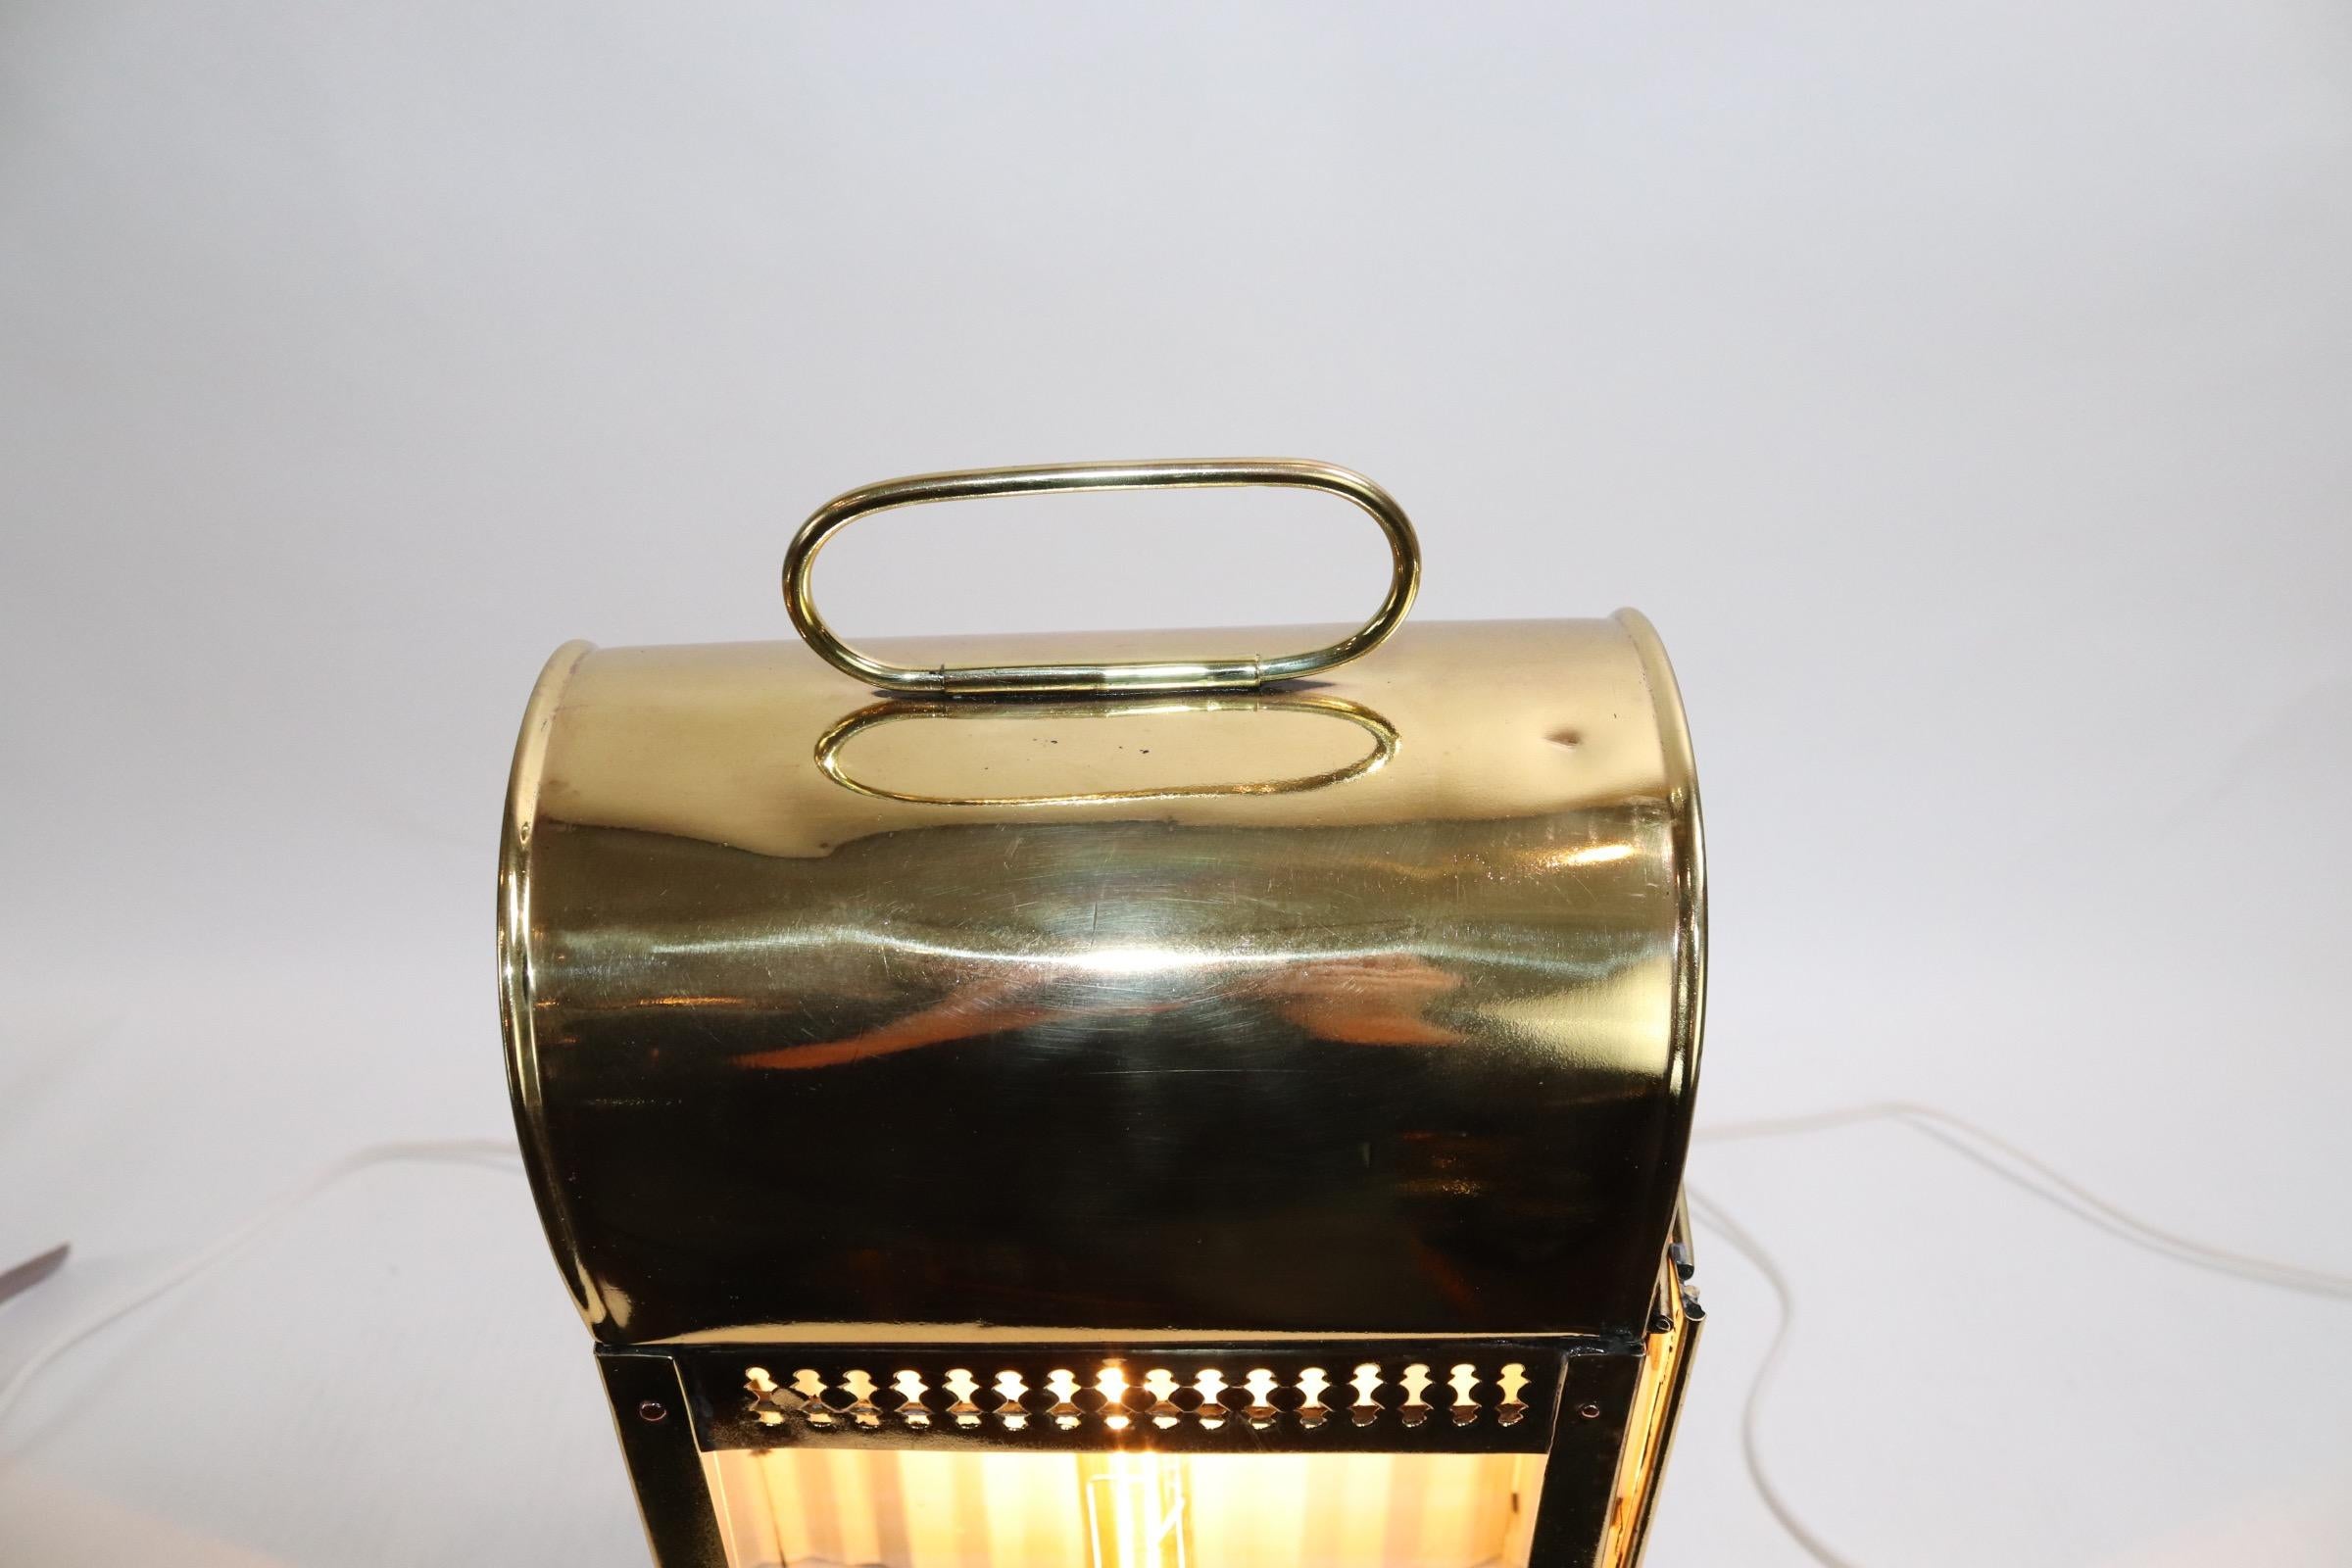 Solid brass cabin lantern from a yacht. Highly polished and lacquered and mounted to a custom wood base. Lantern has a curved vented top with carry handle, mounting flanges on the back. The lantern has been electrified and fitted with a vintage